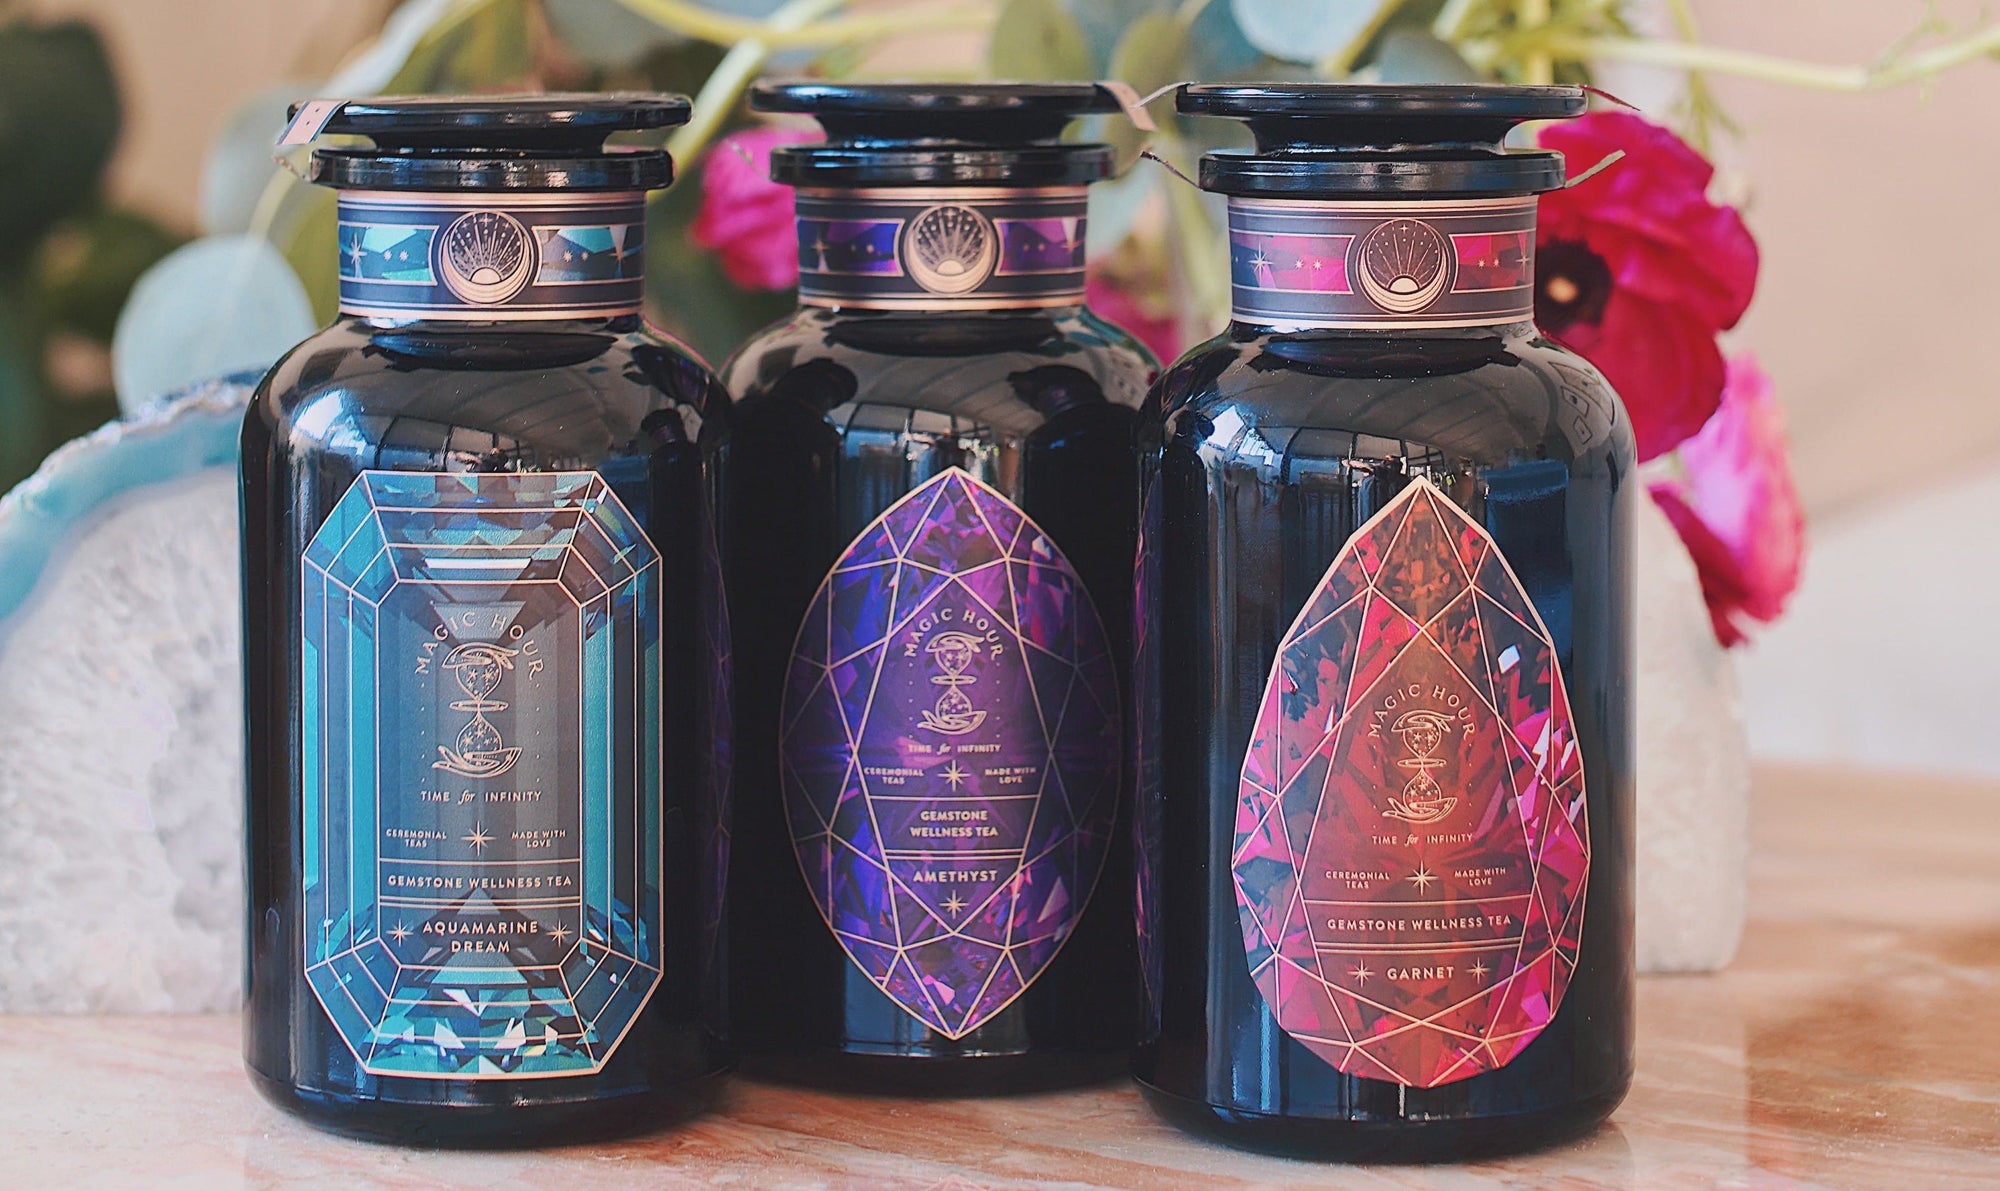 Three dark glass bottles with ornate, geometric labels are displayed side by side on a wooden surface. The labels feature intricate crystal designs in blue, purple, and red tones. A blurred background includes green leaves and a pink flower, enhancing the allure of the **Magic Hour Gemstone Bundle: Garnet, Amethyst, Aquamarine**.